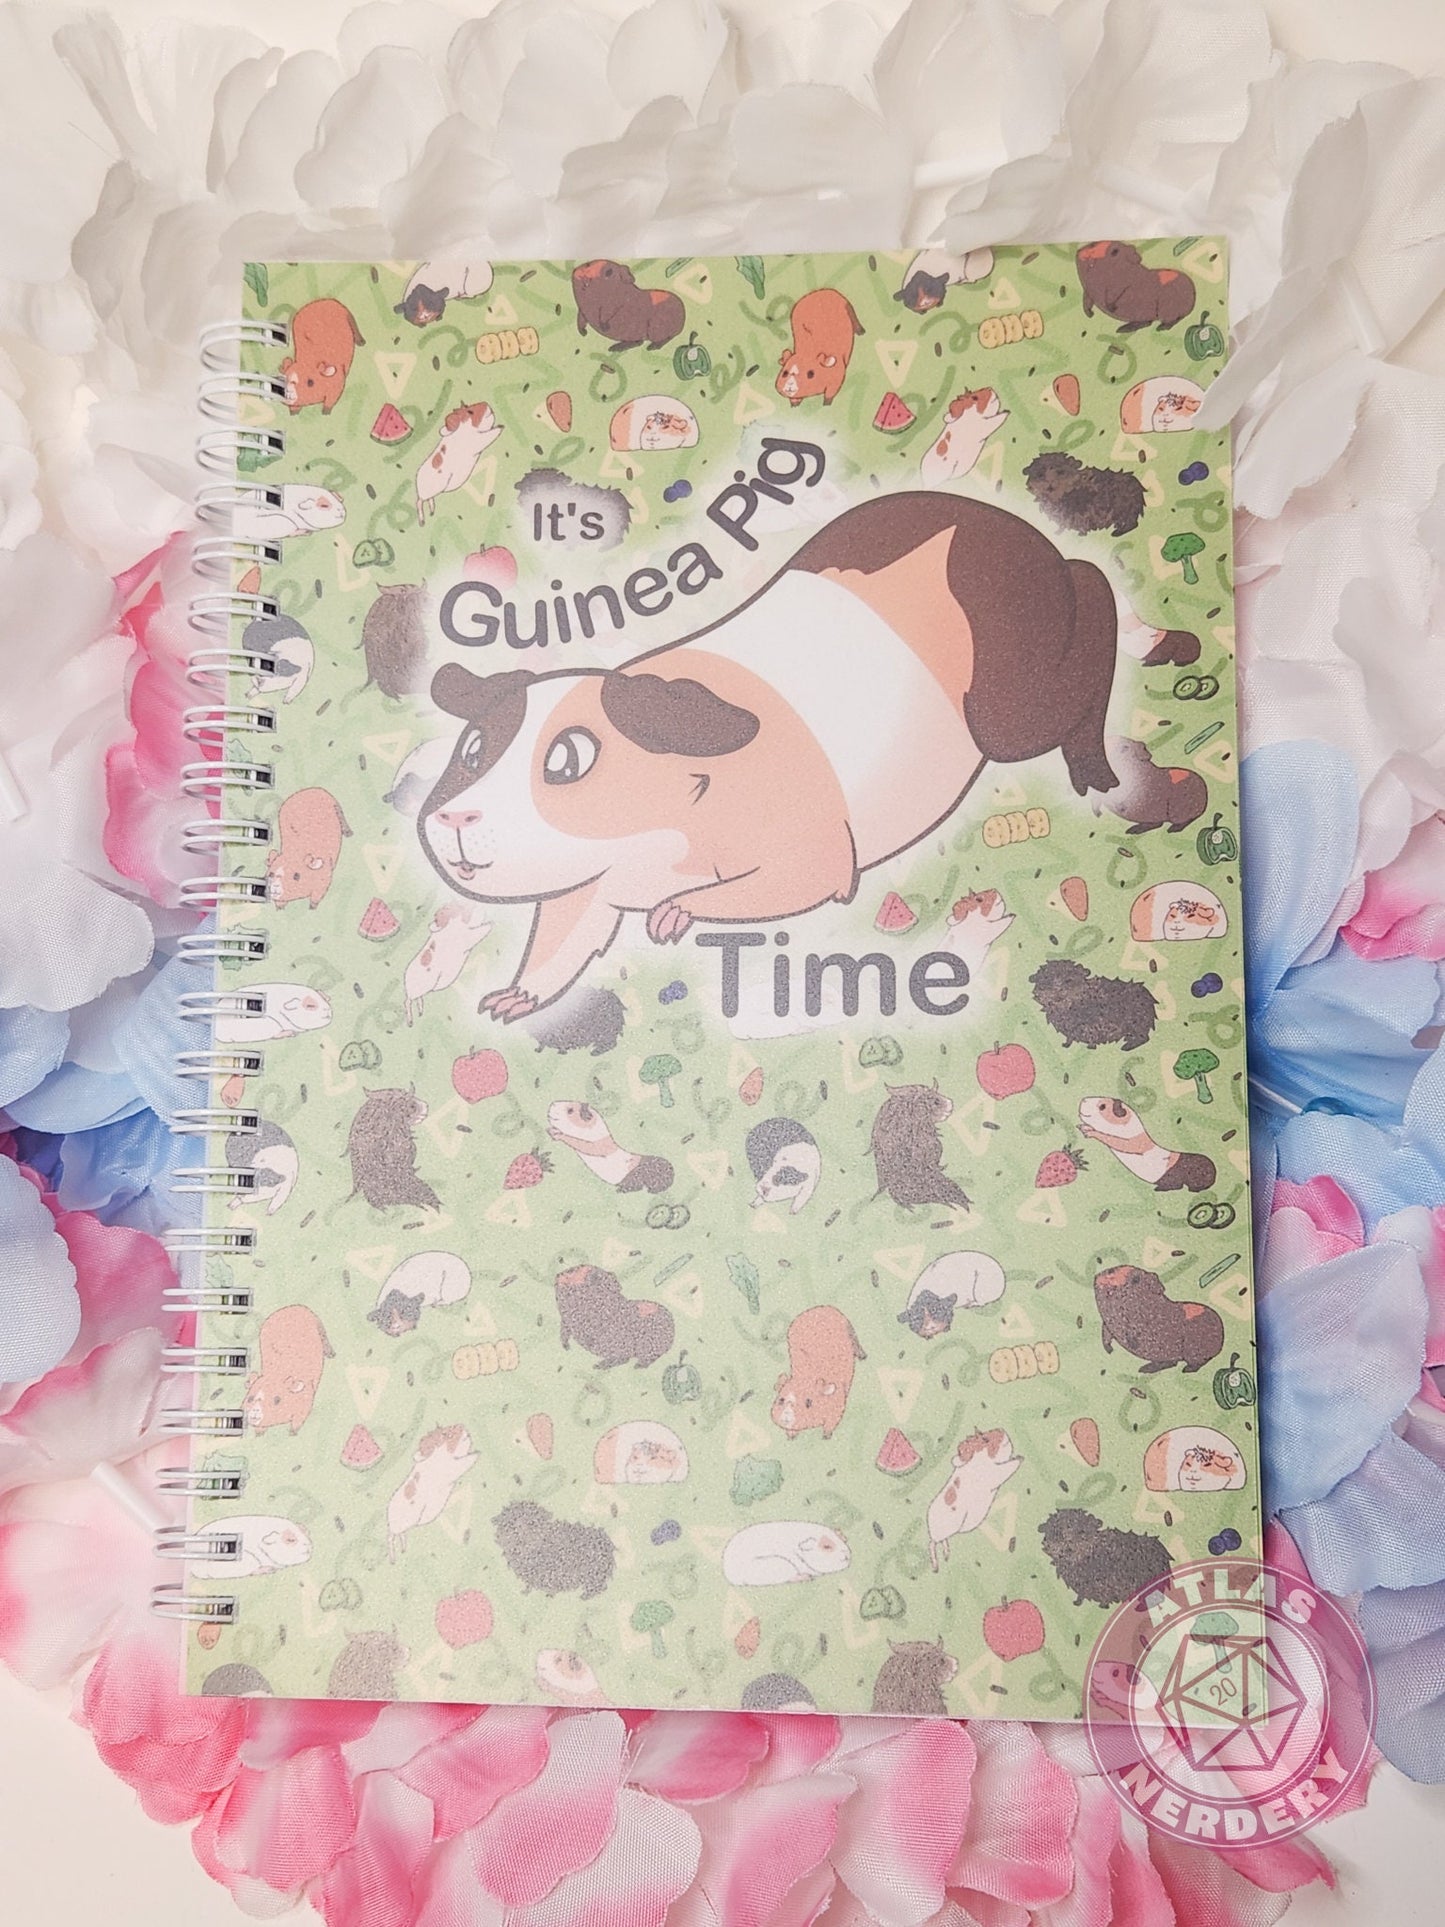 Its Guinea Pig Time - Reusable Sticker Book Size A5 with White Spinal Binding